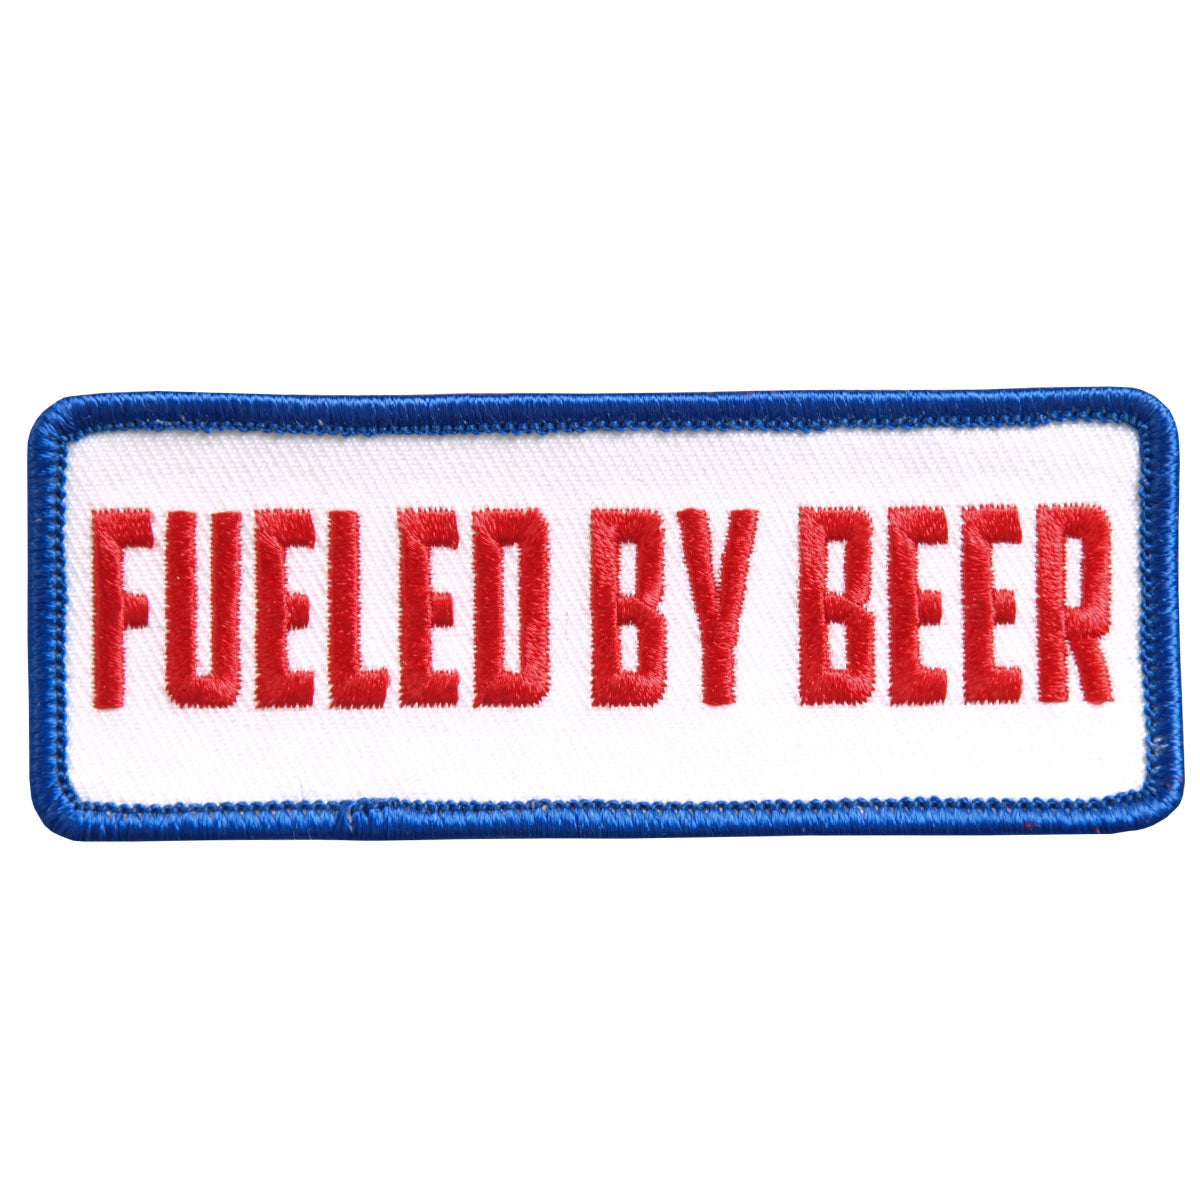 Hot Leathers Fueled By Beer Patch